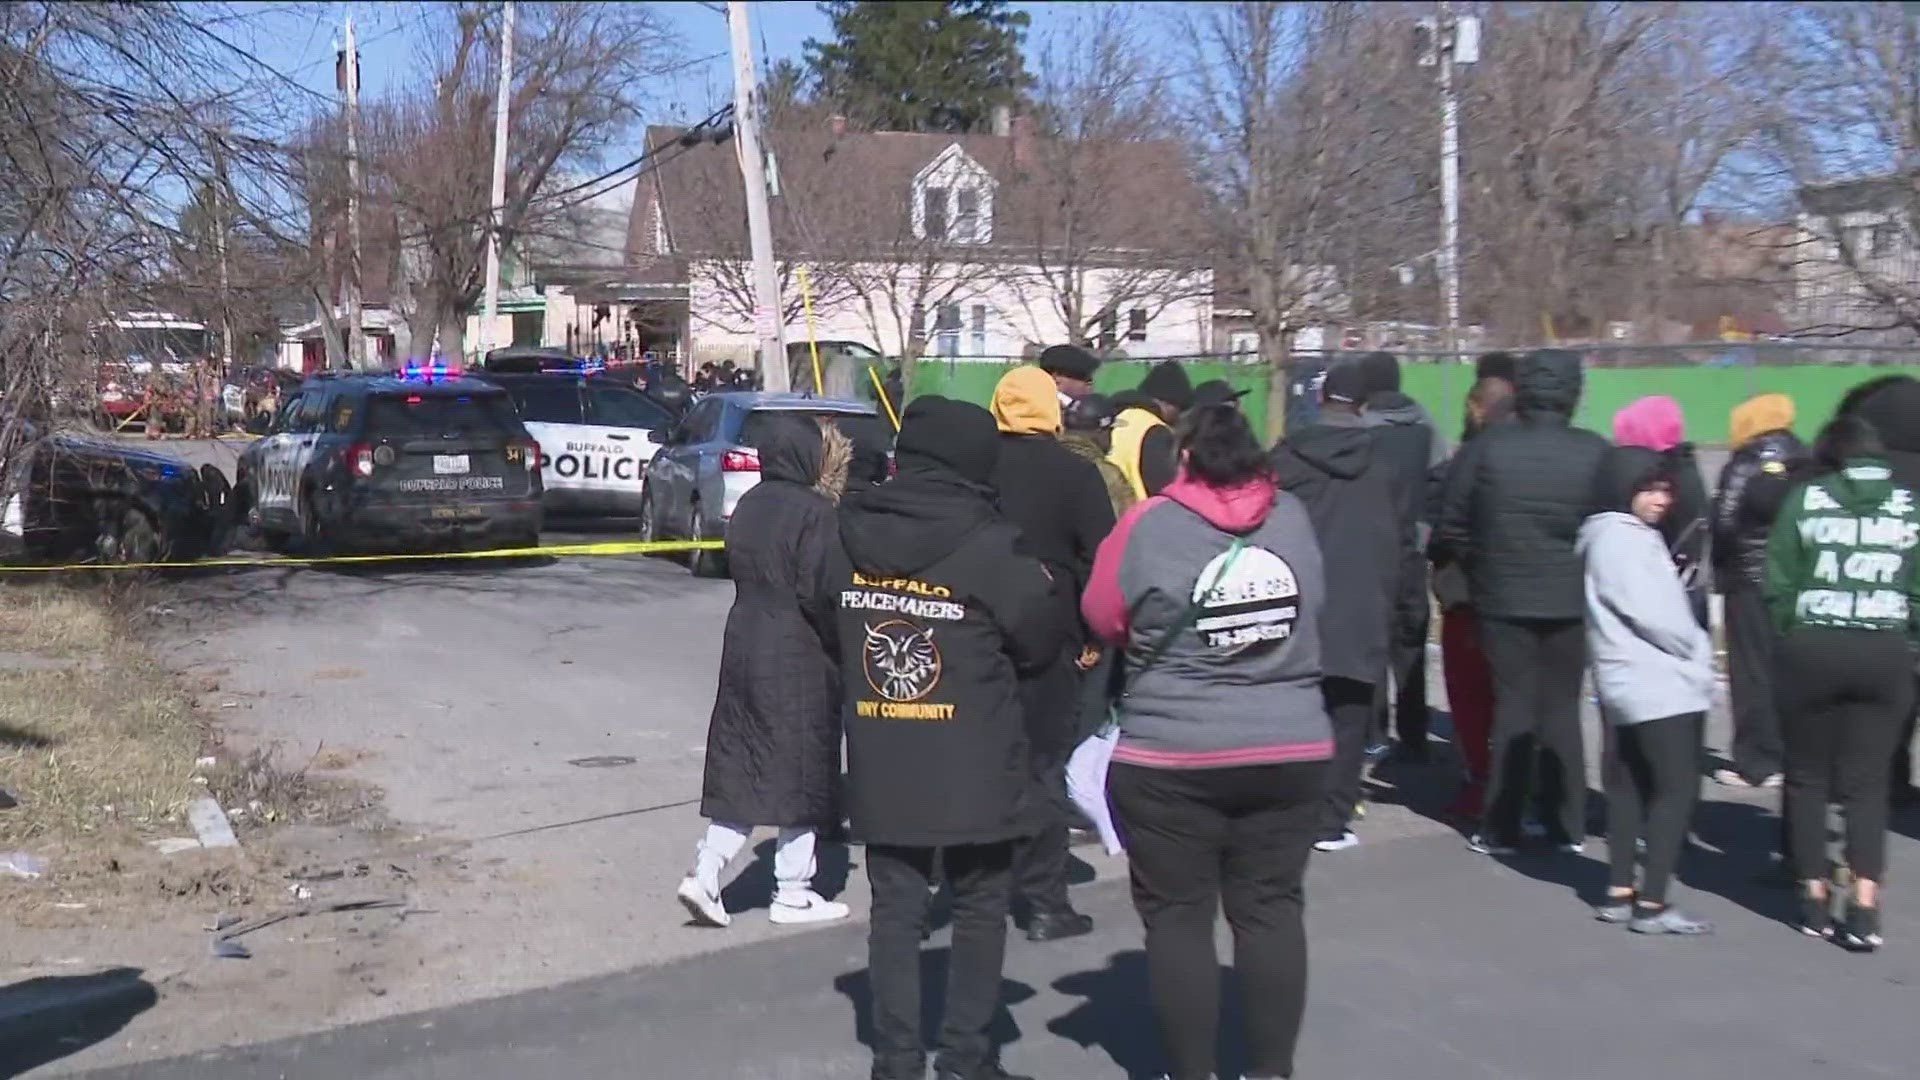 Relatives say they want justice over the killing.